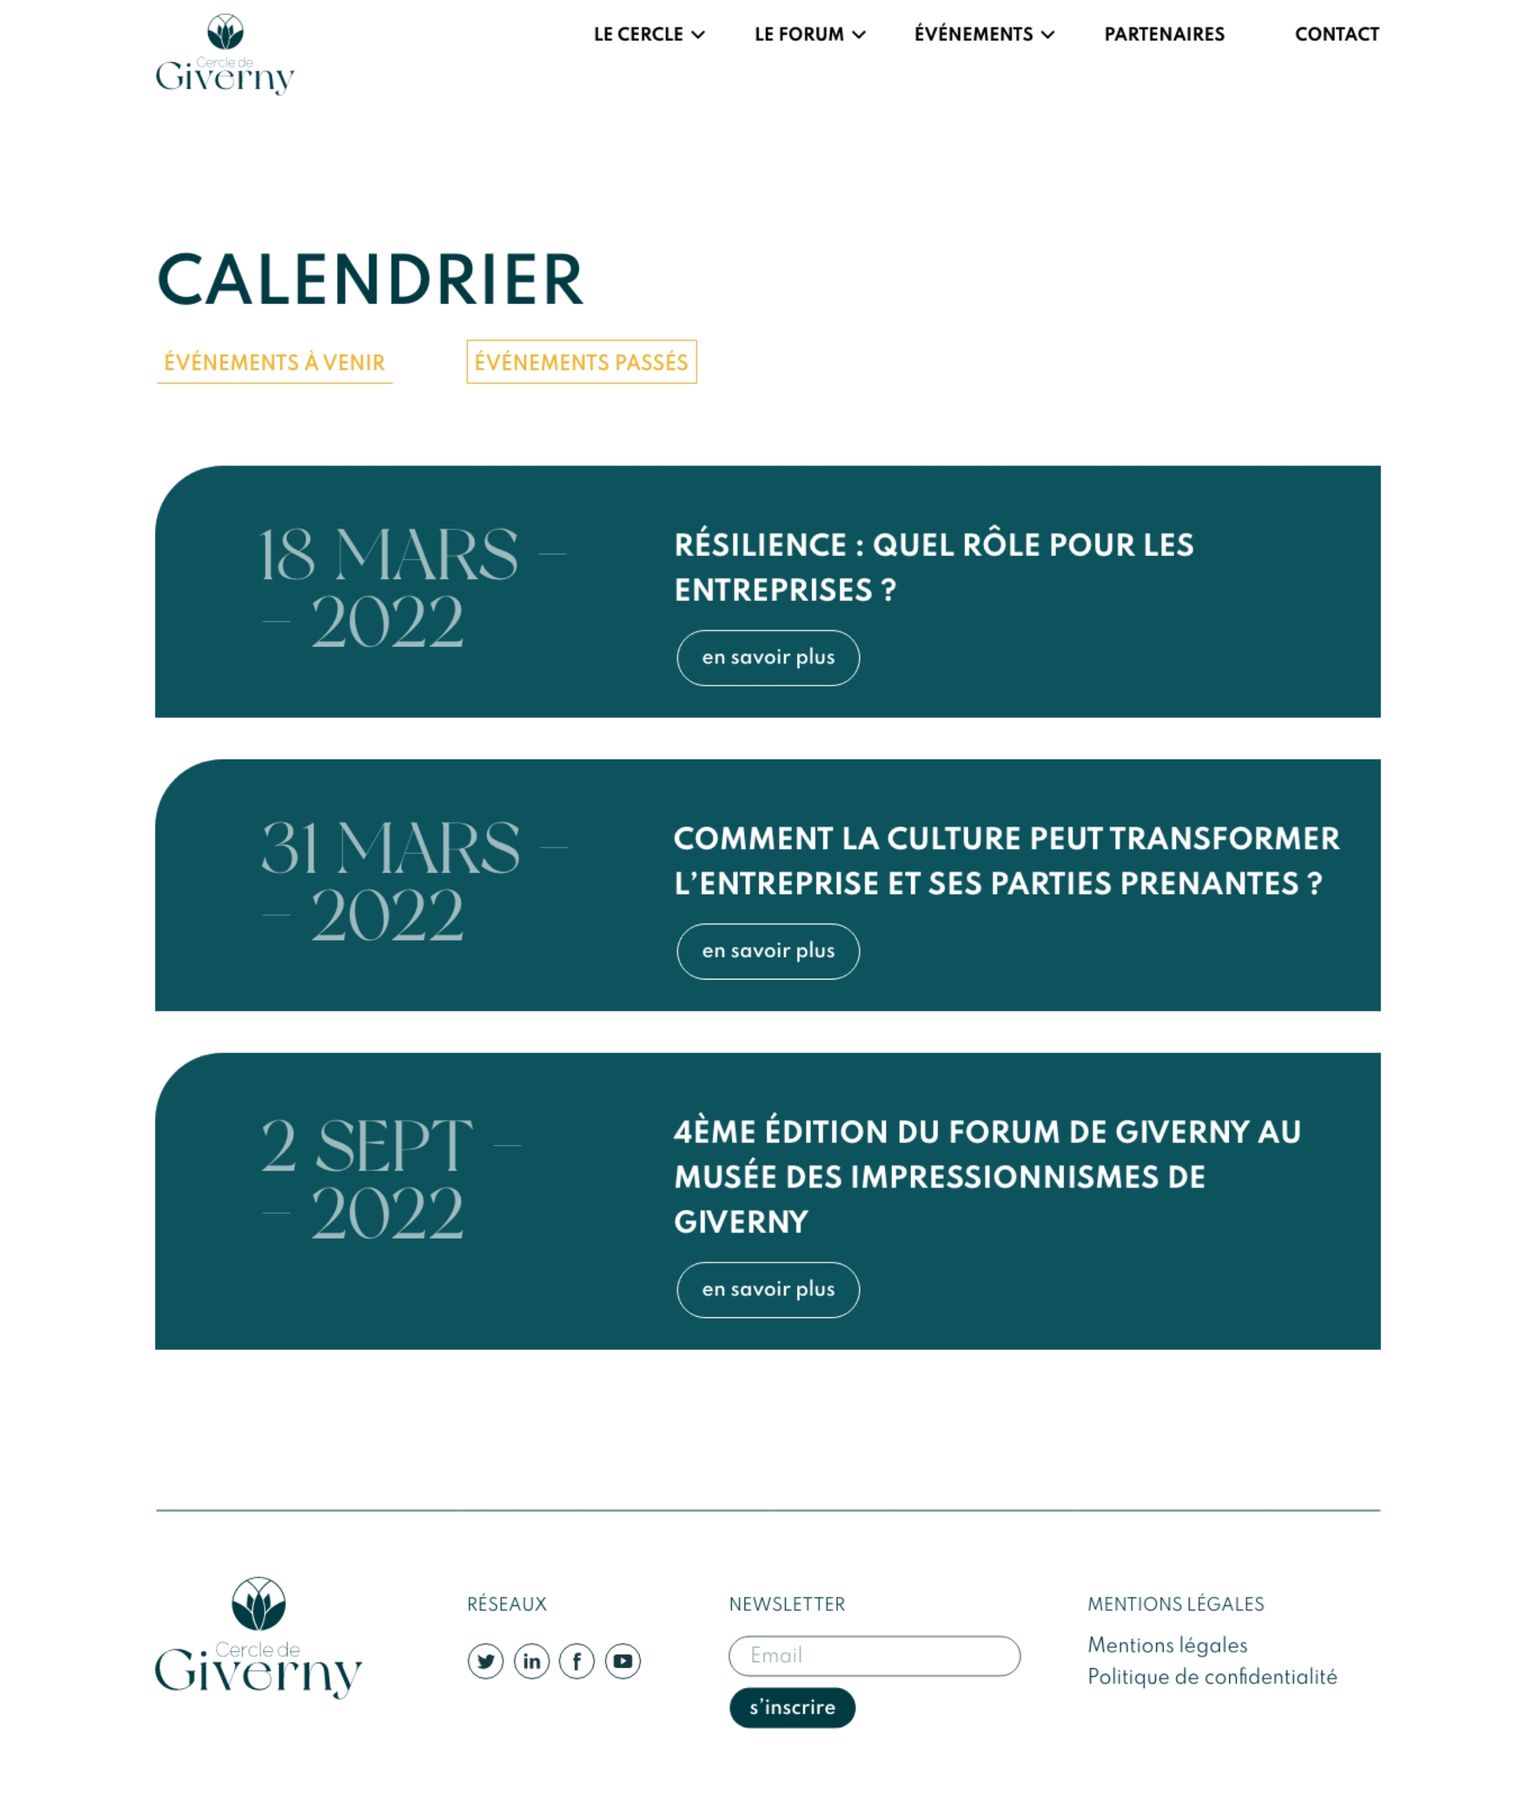 Calendrier du site giverny